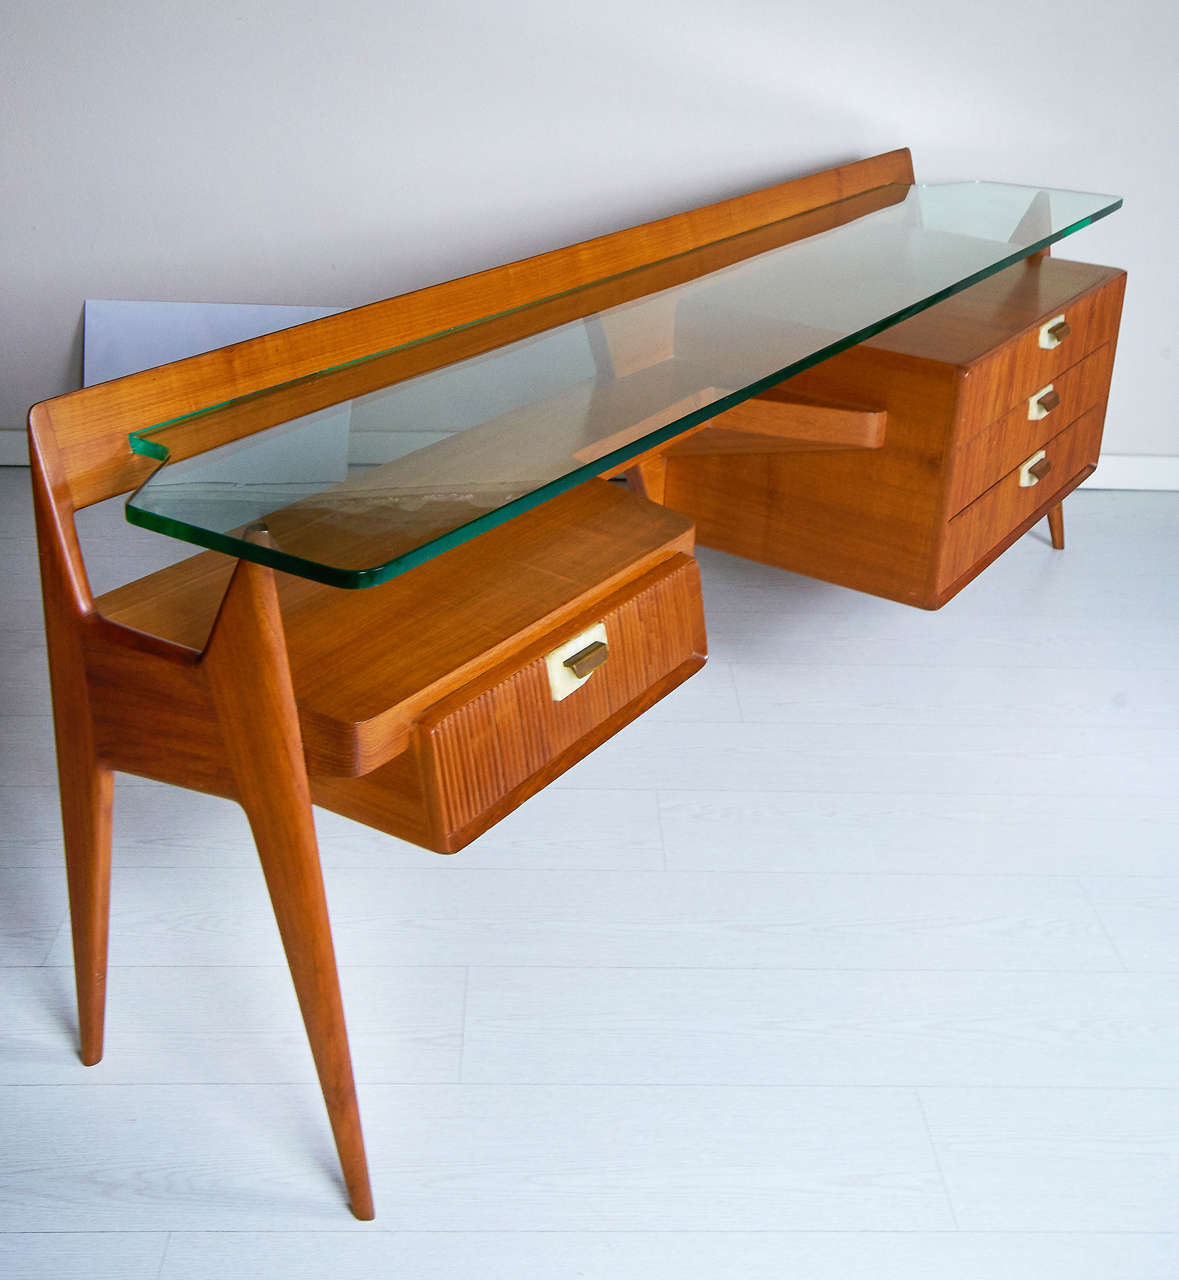 Beautiful build quality cherrywood, grooved drawers and handles in onyx and brass. The glass is very thick shaped and fits into the structure of the fourniture to self sustaining.
This kind of fourniture from versatile features can be used as a desk